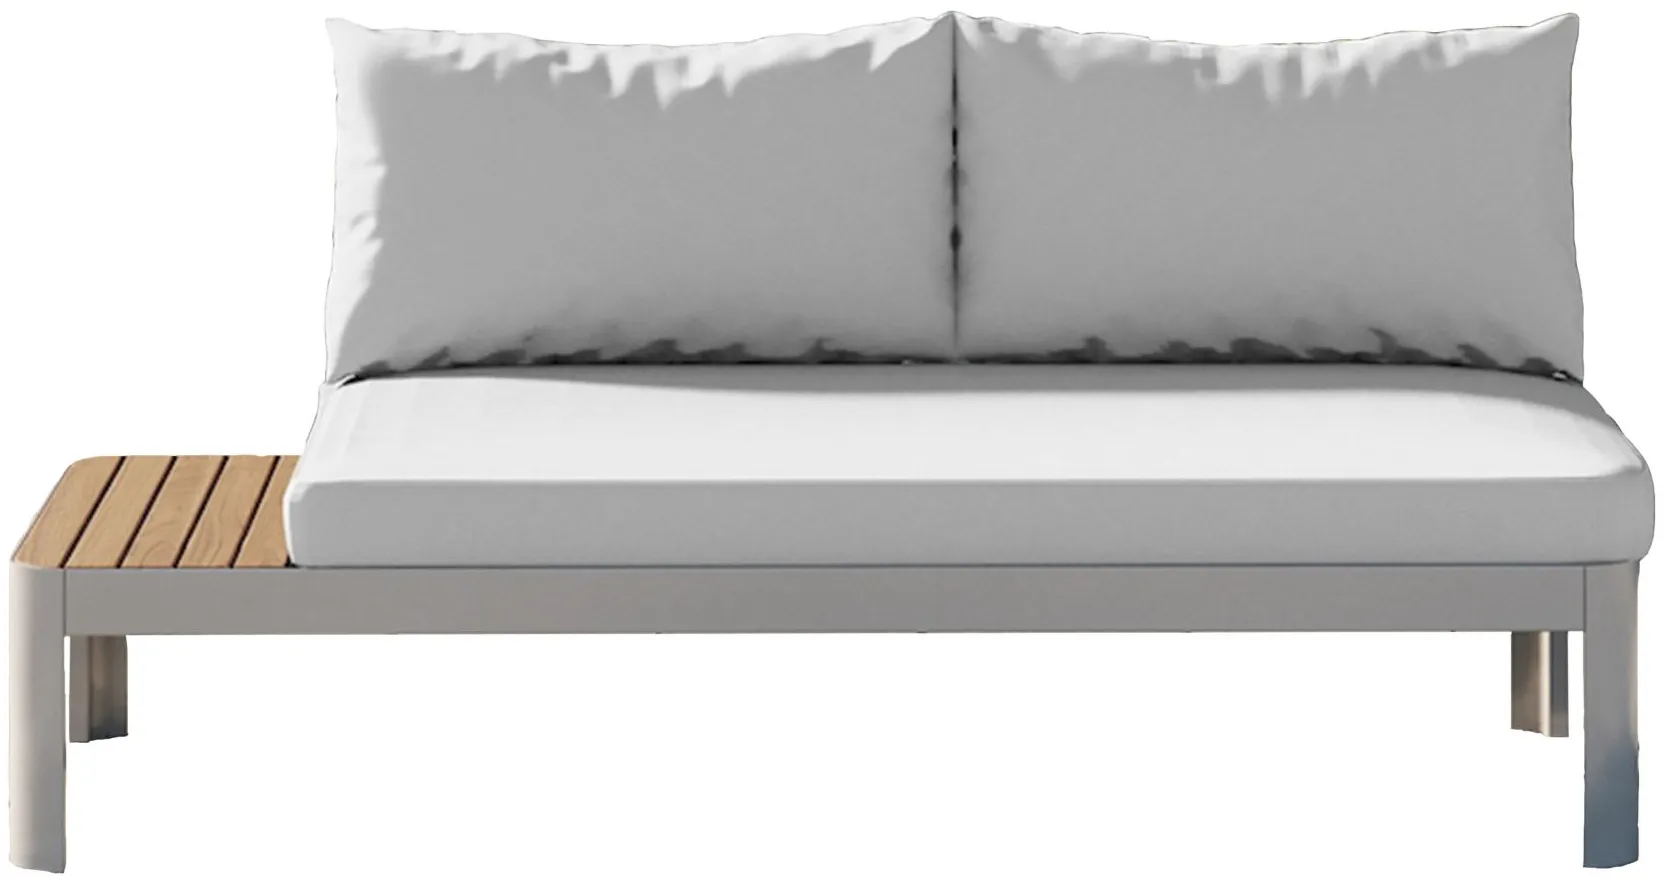 Portals Patio Sofa with Cushions in Milky White by International Home Miami